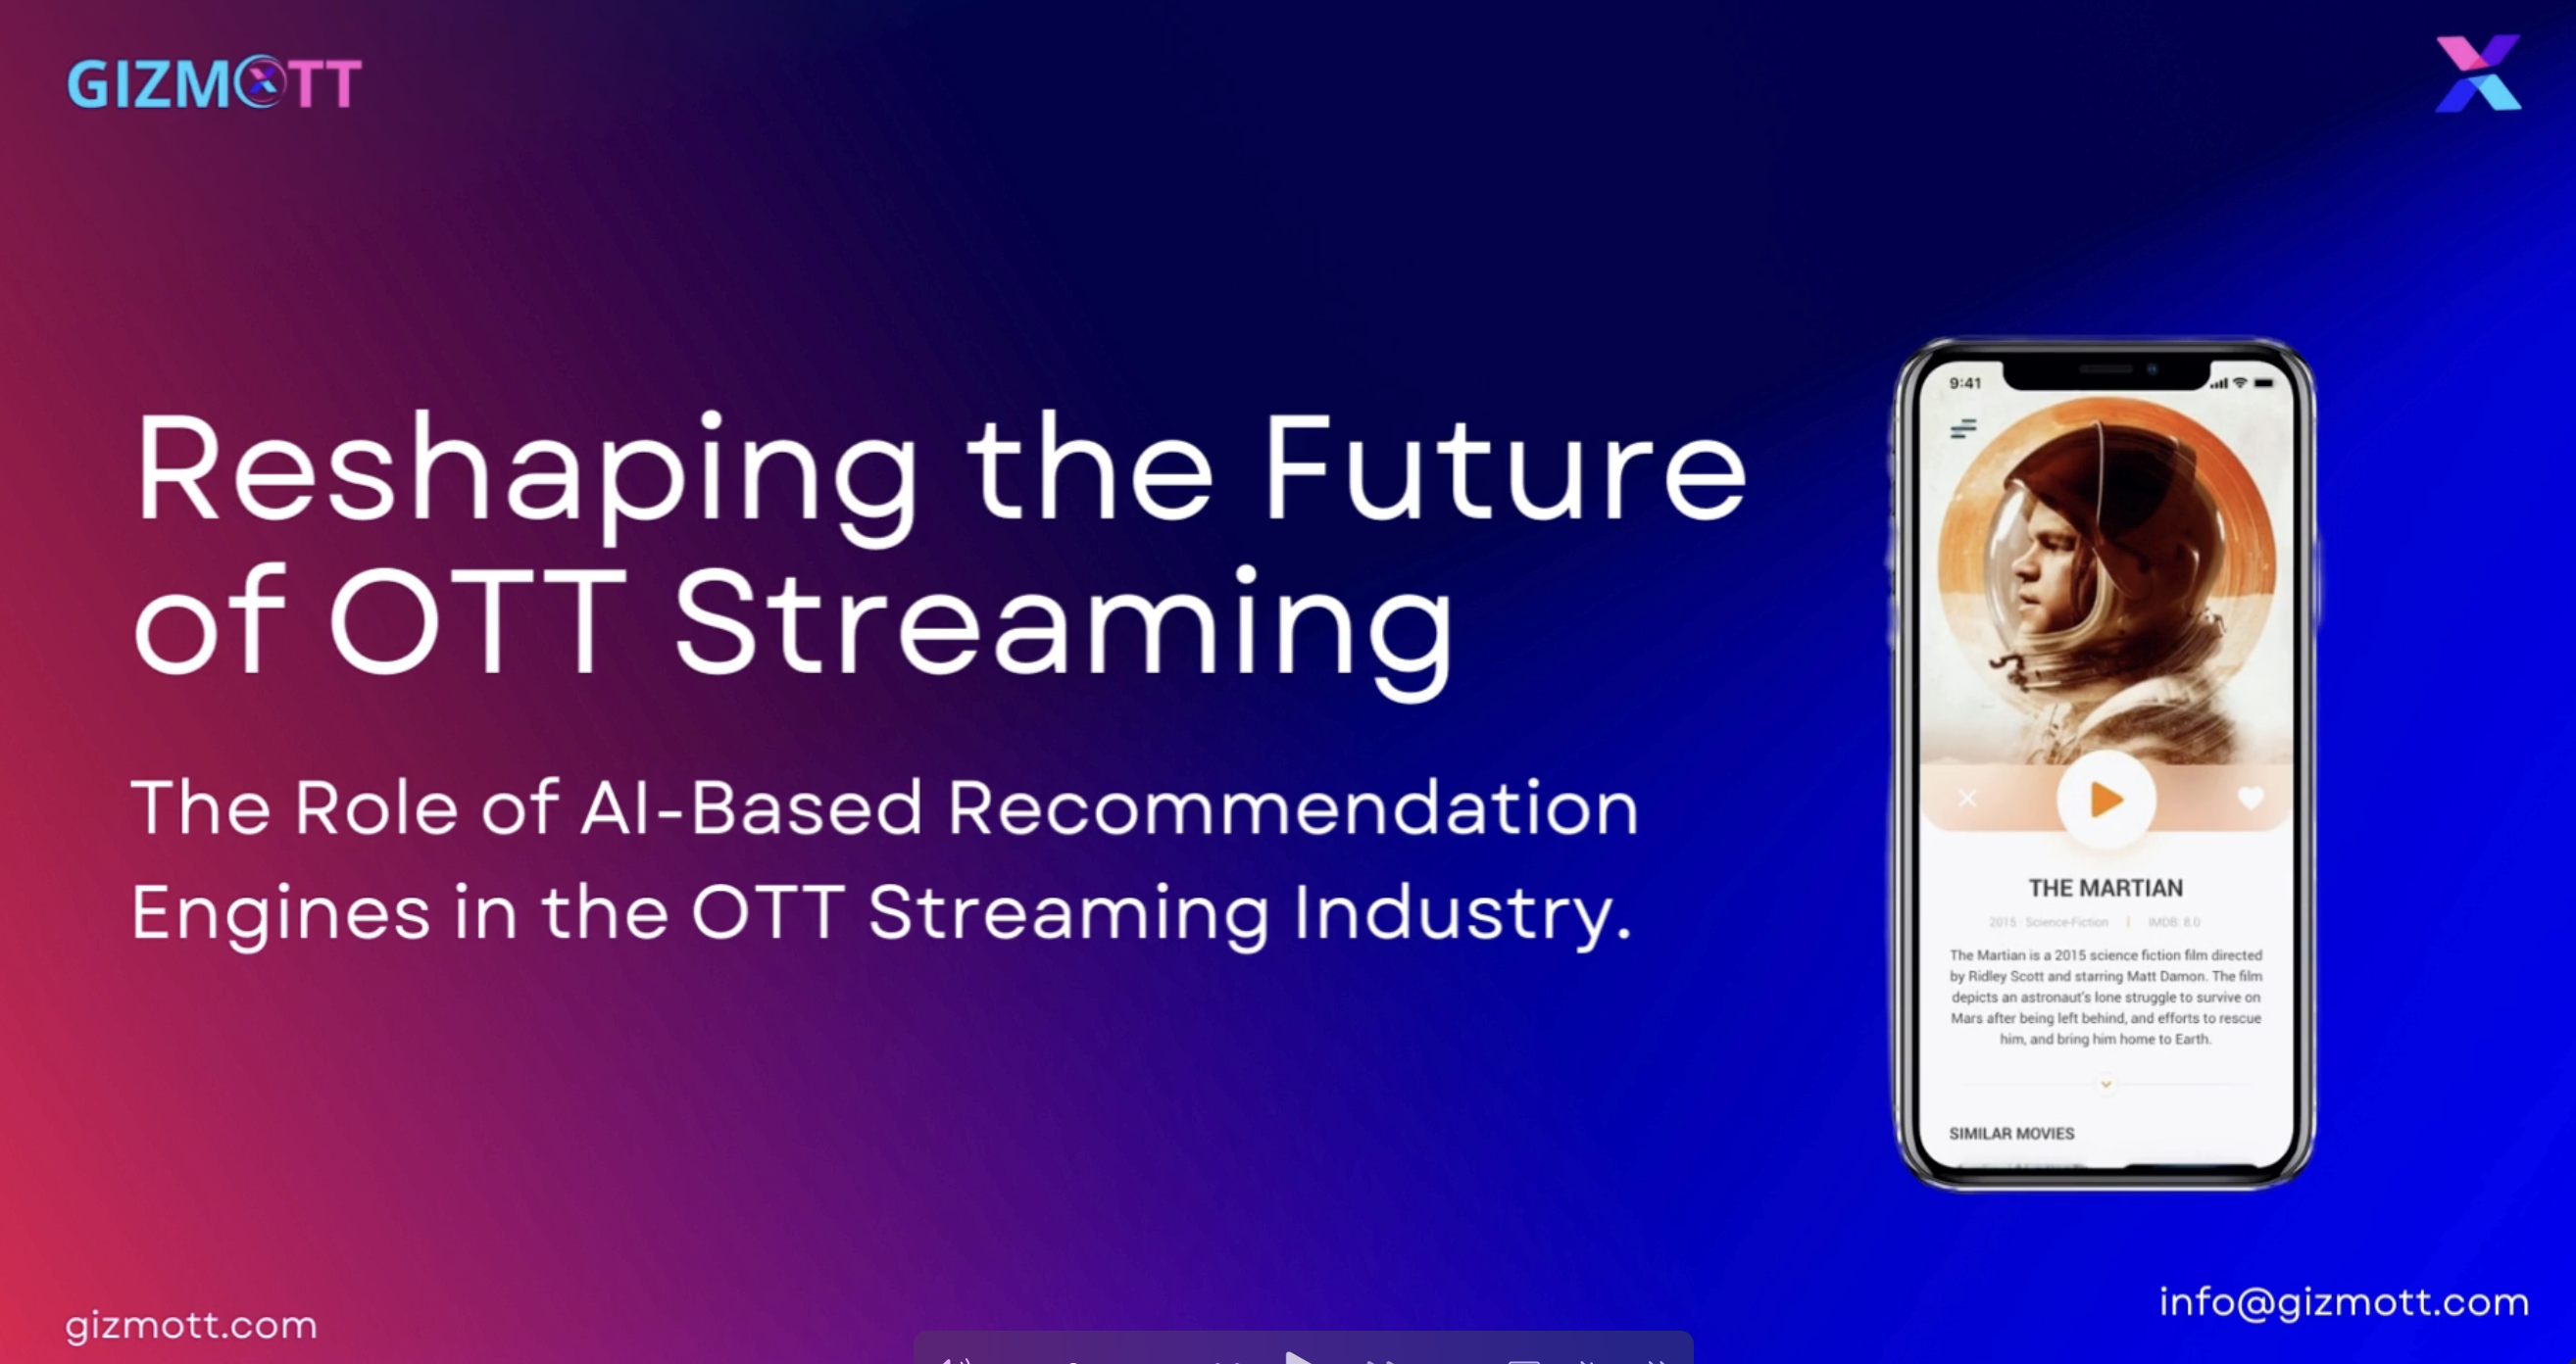 Revolutionizing Entertainment: The Role of AI-Based Recommendation Engines in the OTT Industry